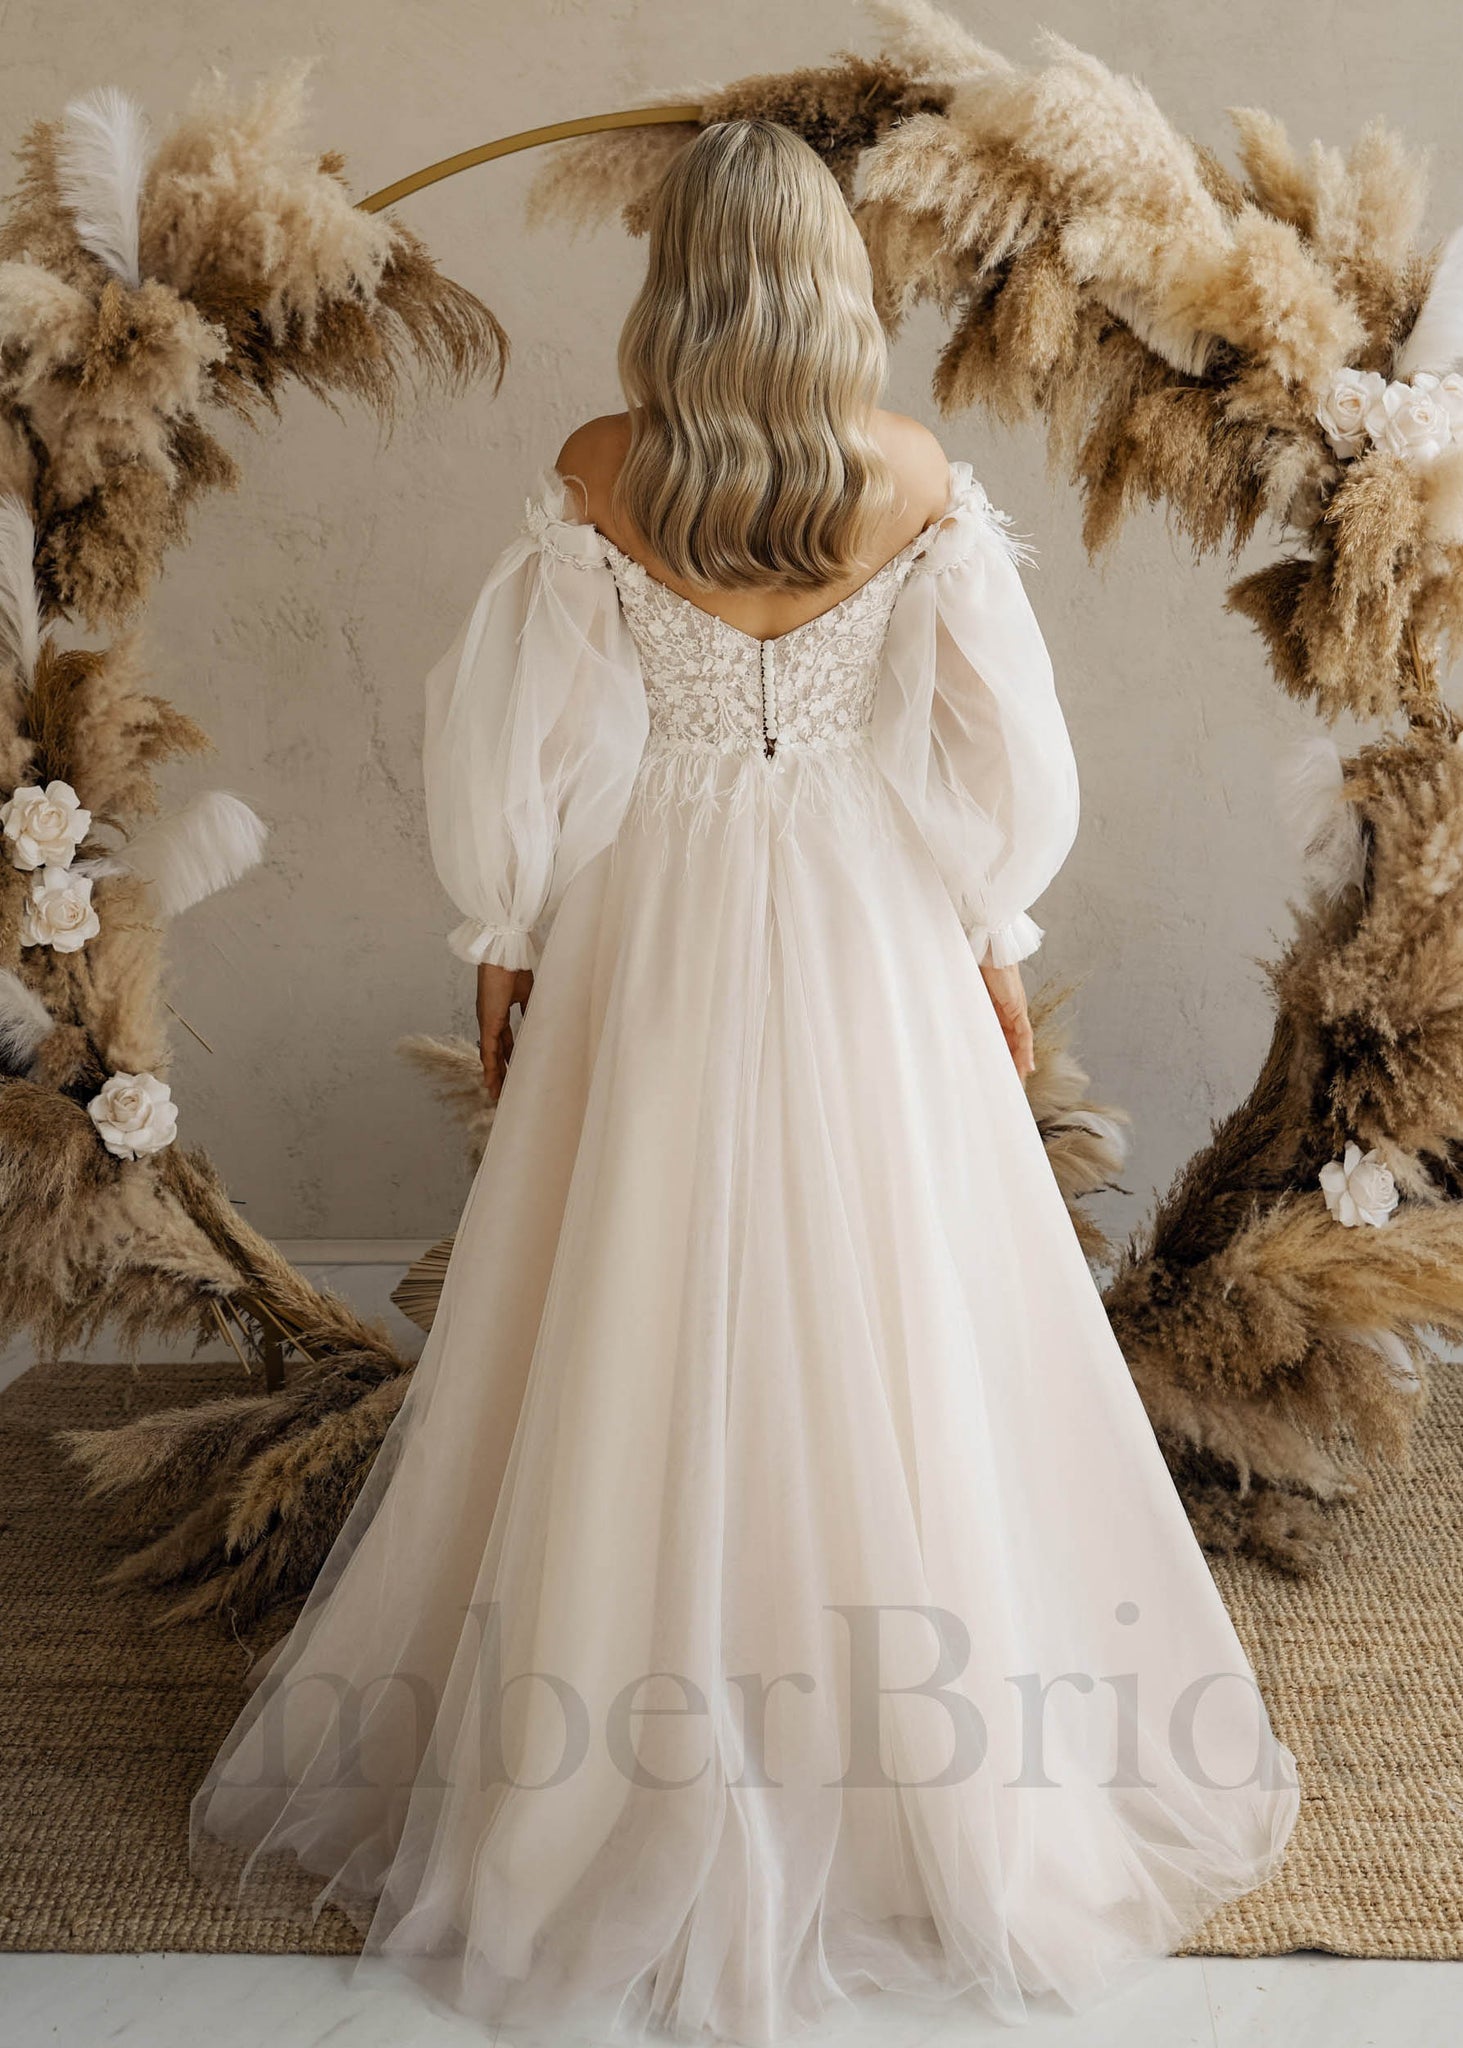 Rustic A Line Floral Wedding Dress with Feathers and Detachable Sleeves